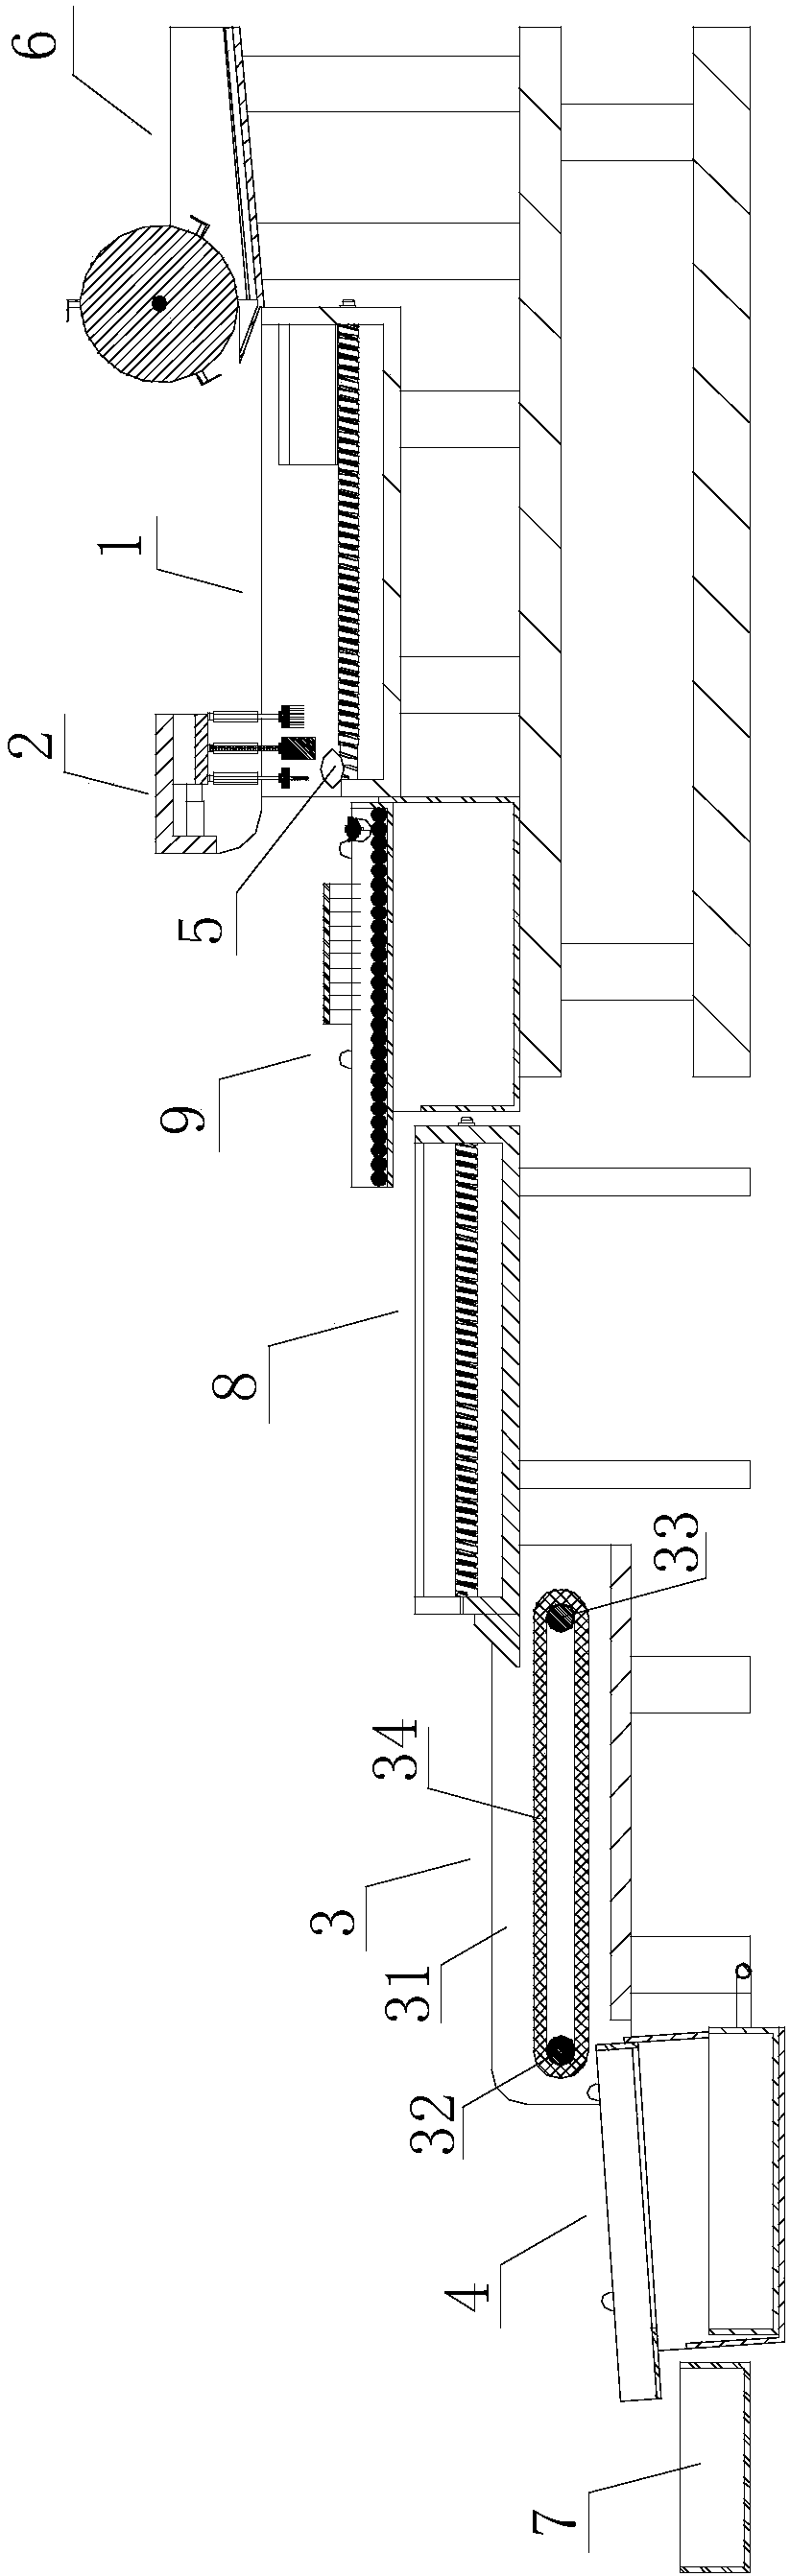 Continuous production system for lotus seed splitting and plumule-removing processing